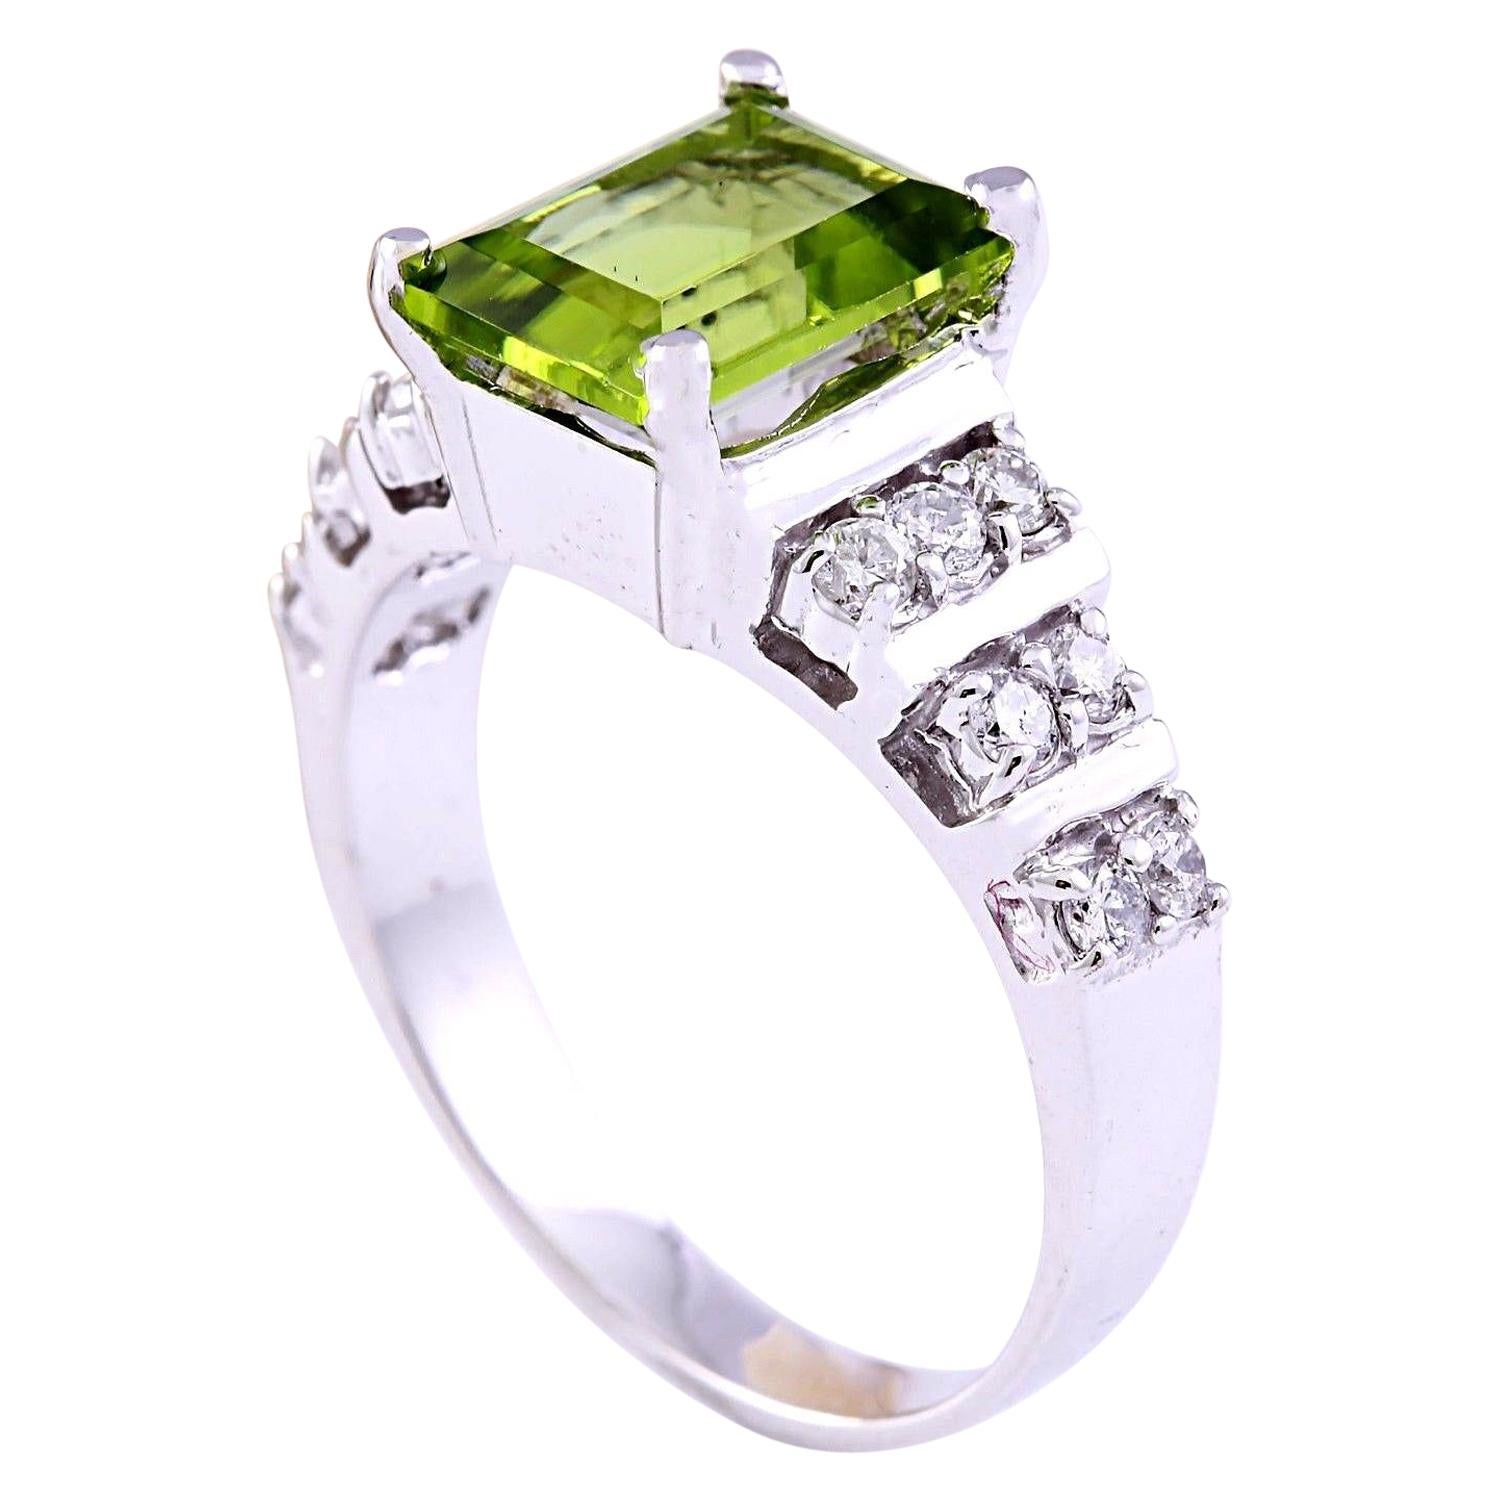 Emerald Cut Dazzling Natural Peridot Diamond Ring In 14 Karat Solid White Gold  For Sale